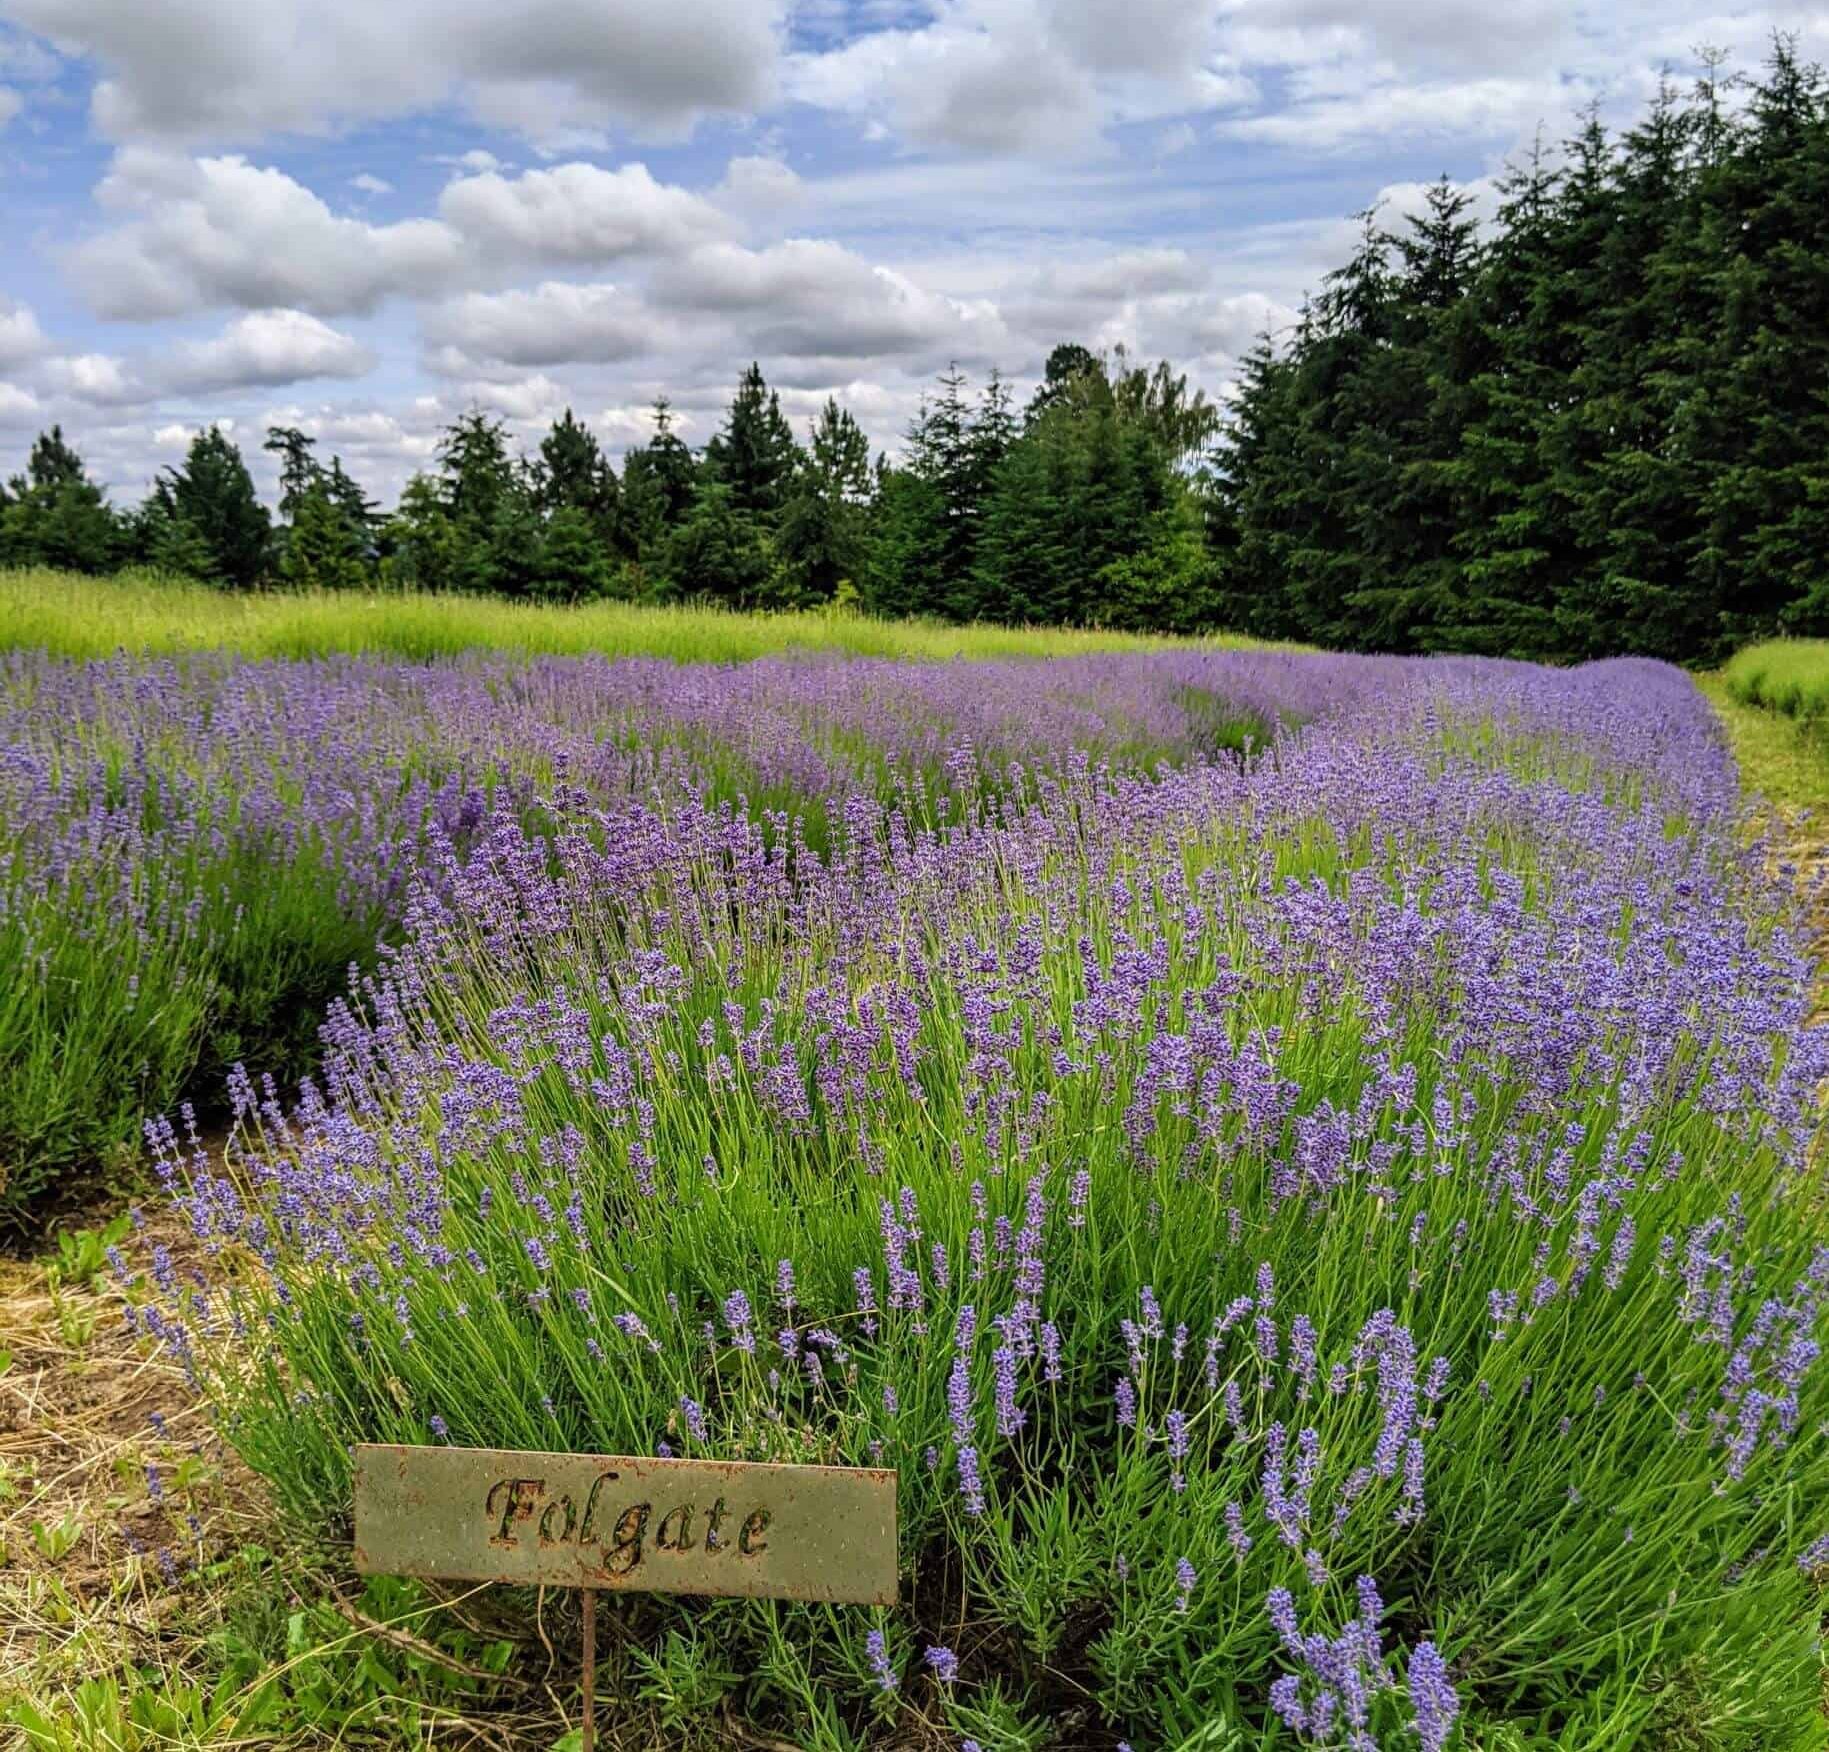 Folgate is one of 25 varietals of lavender available at Mountainside Lavender.